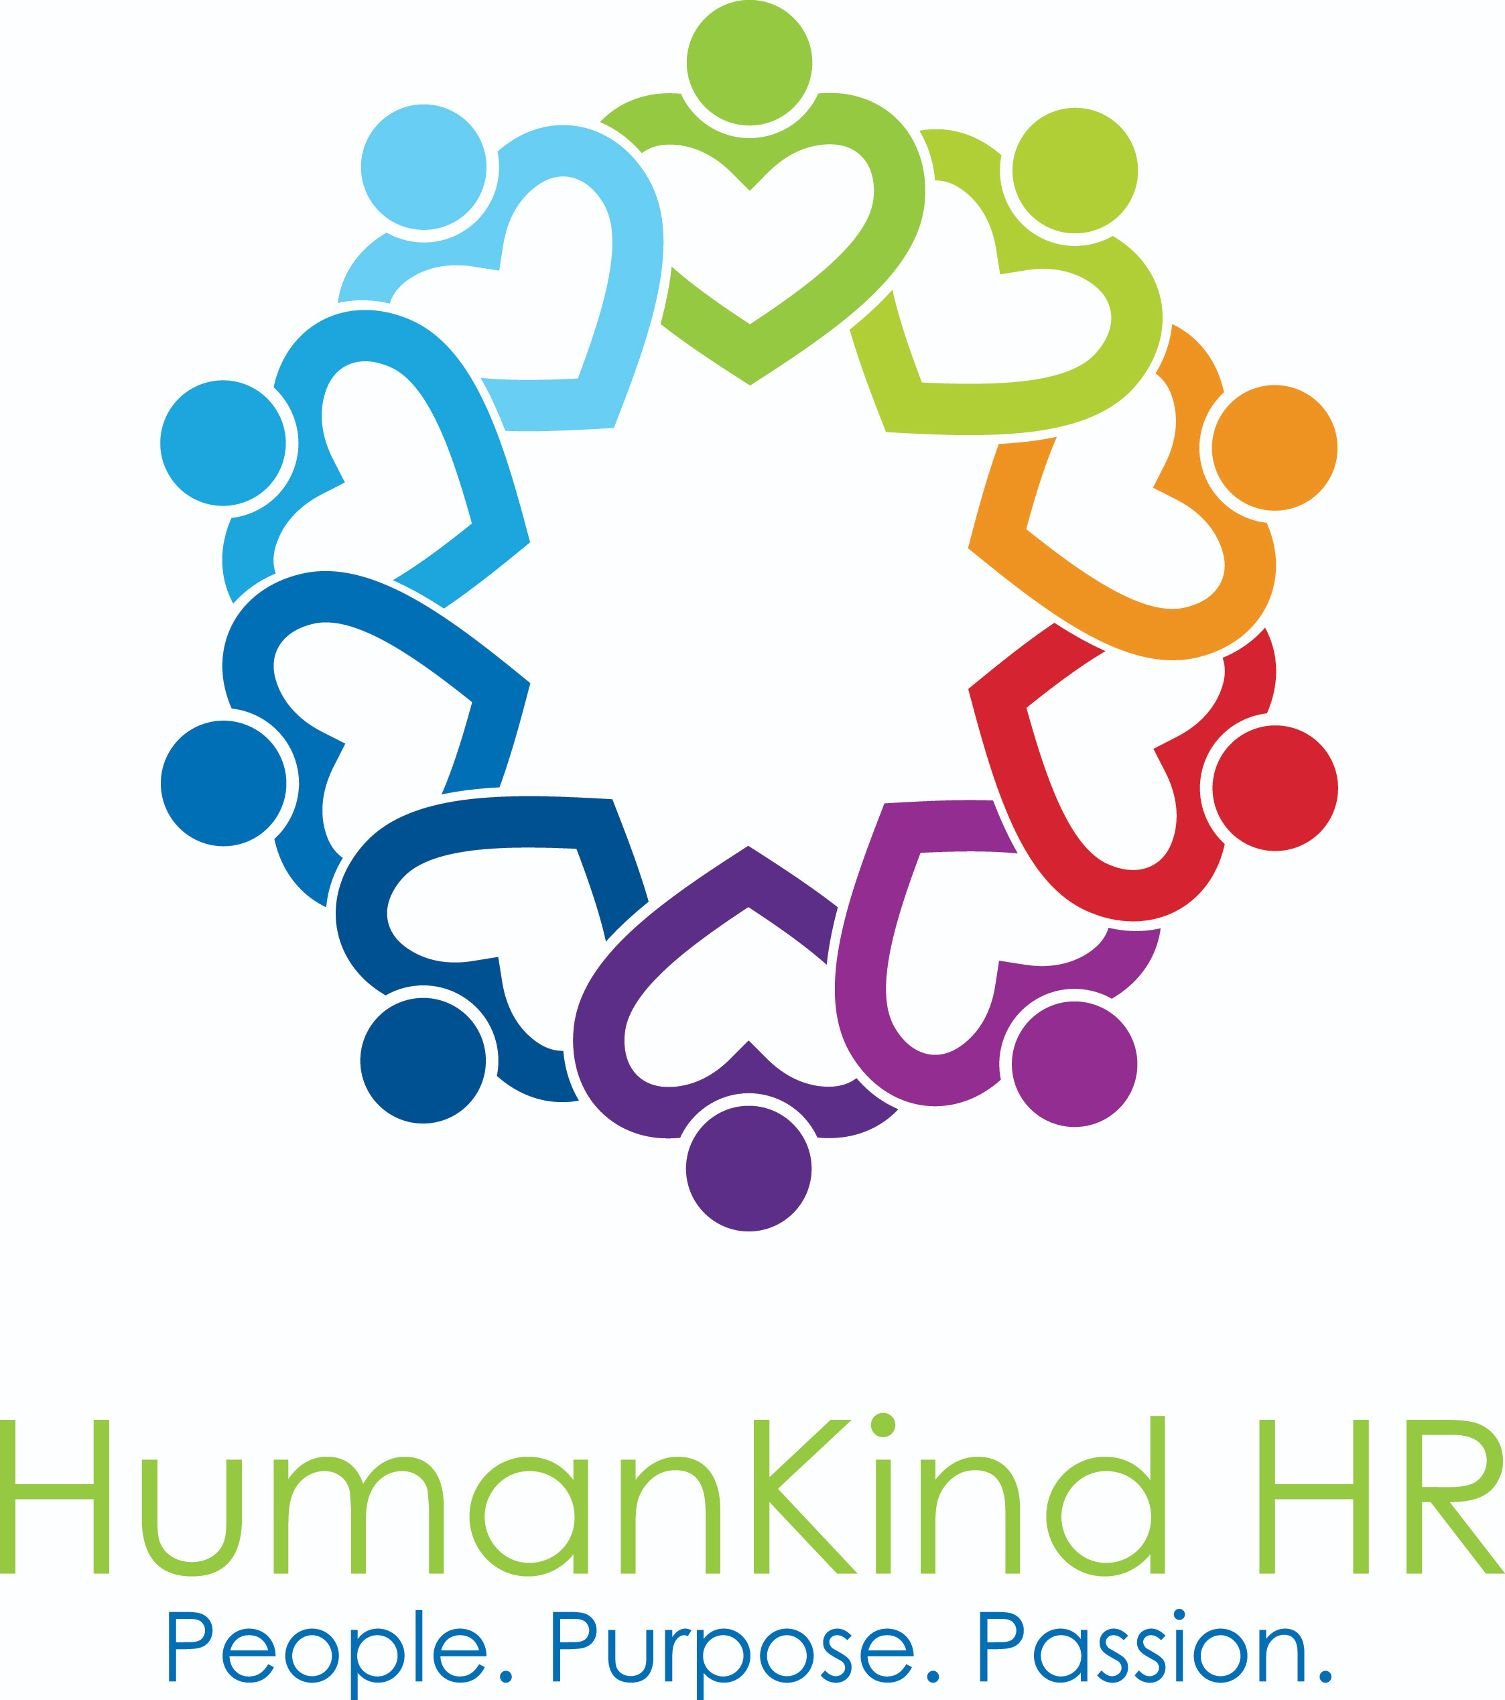 Humankind hr logo stacked